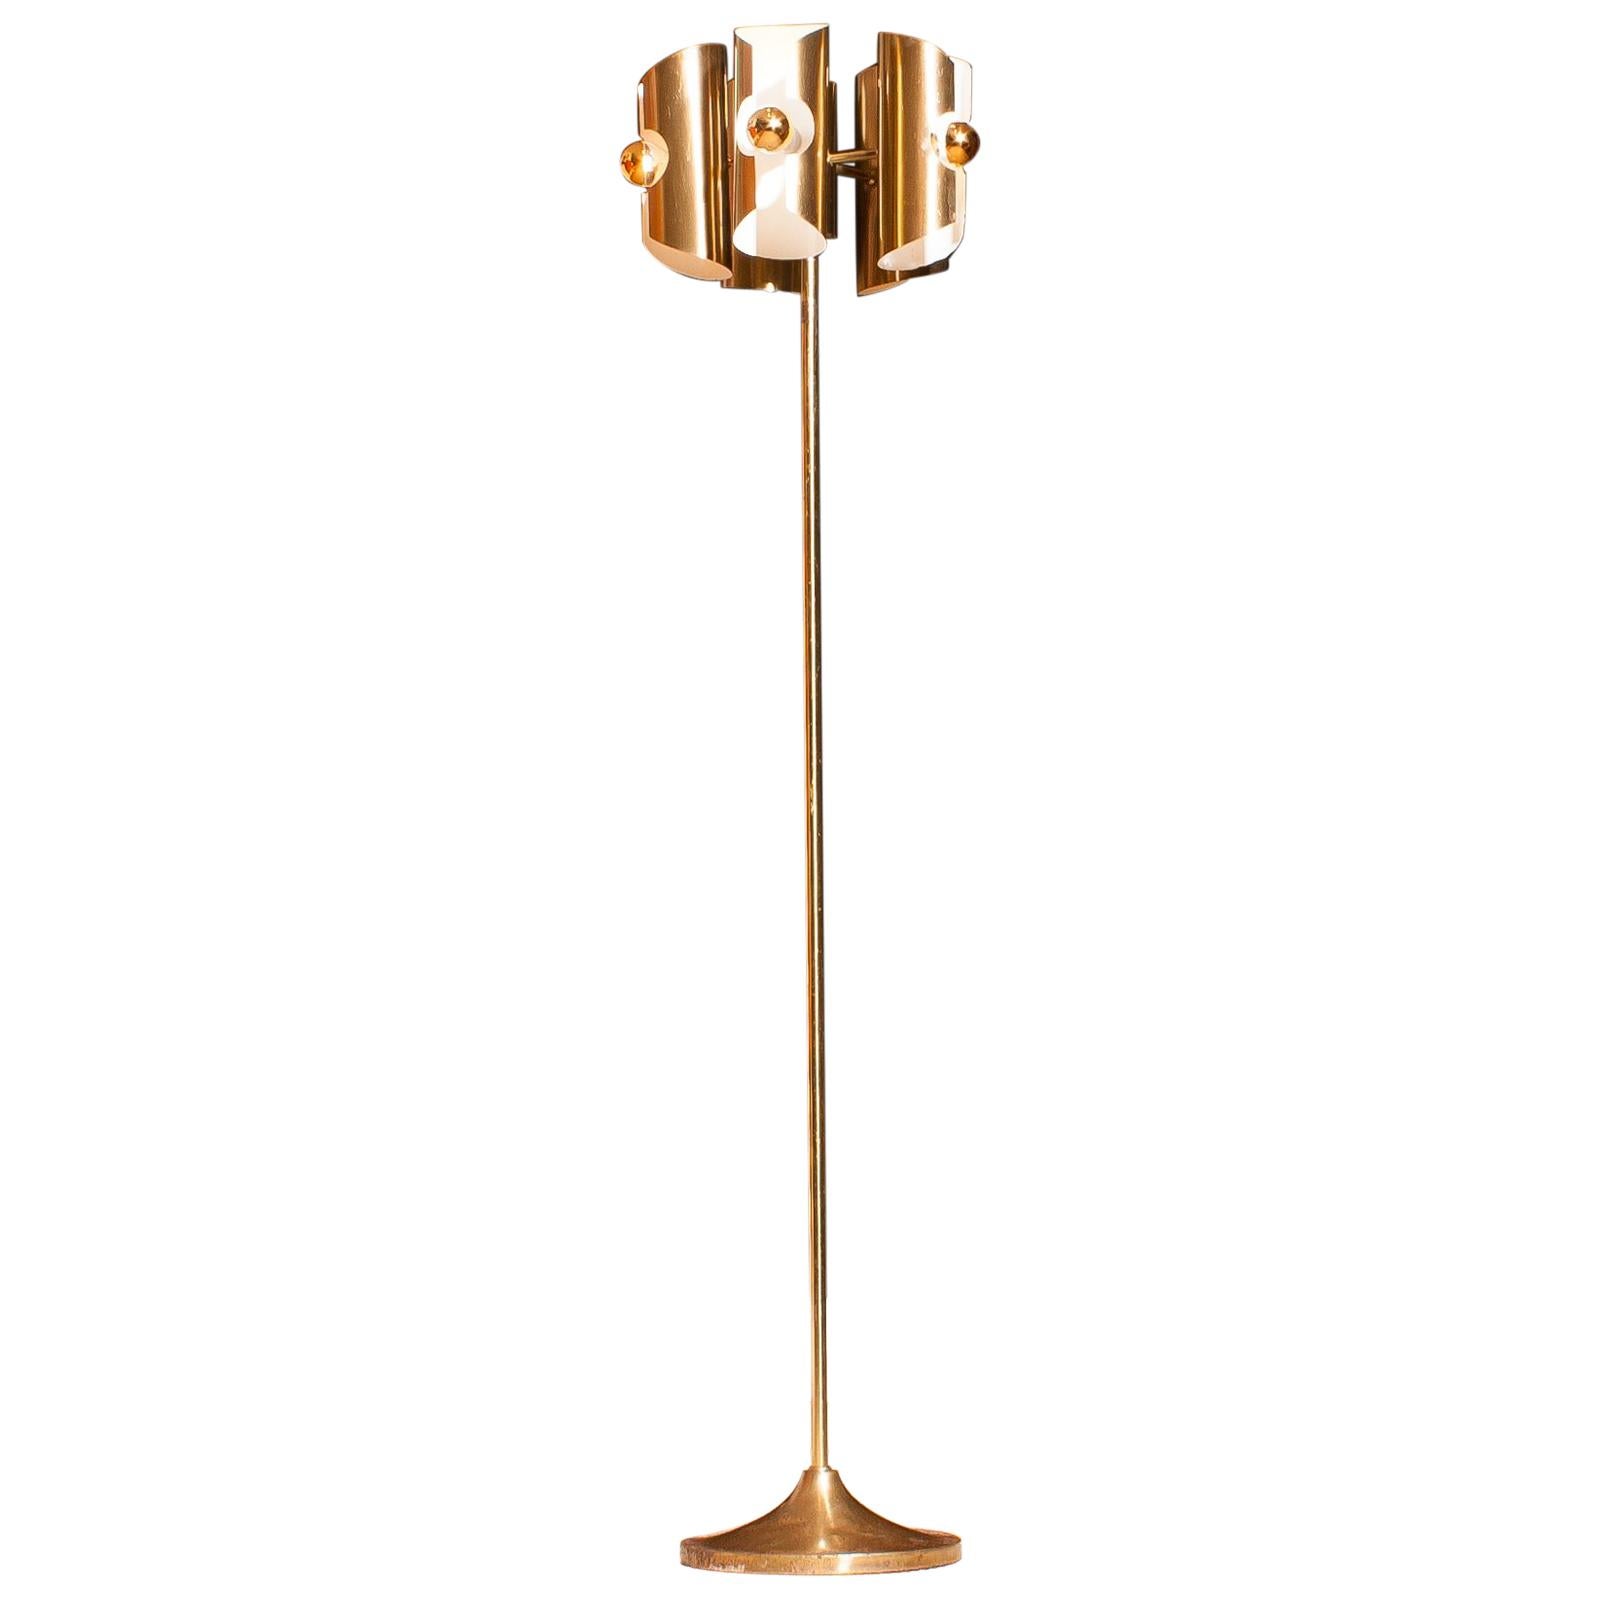 1960 Lovely Italian Brass Floor Lamp with Five Brushed Brass Shades